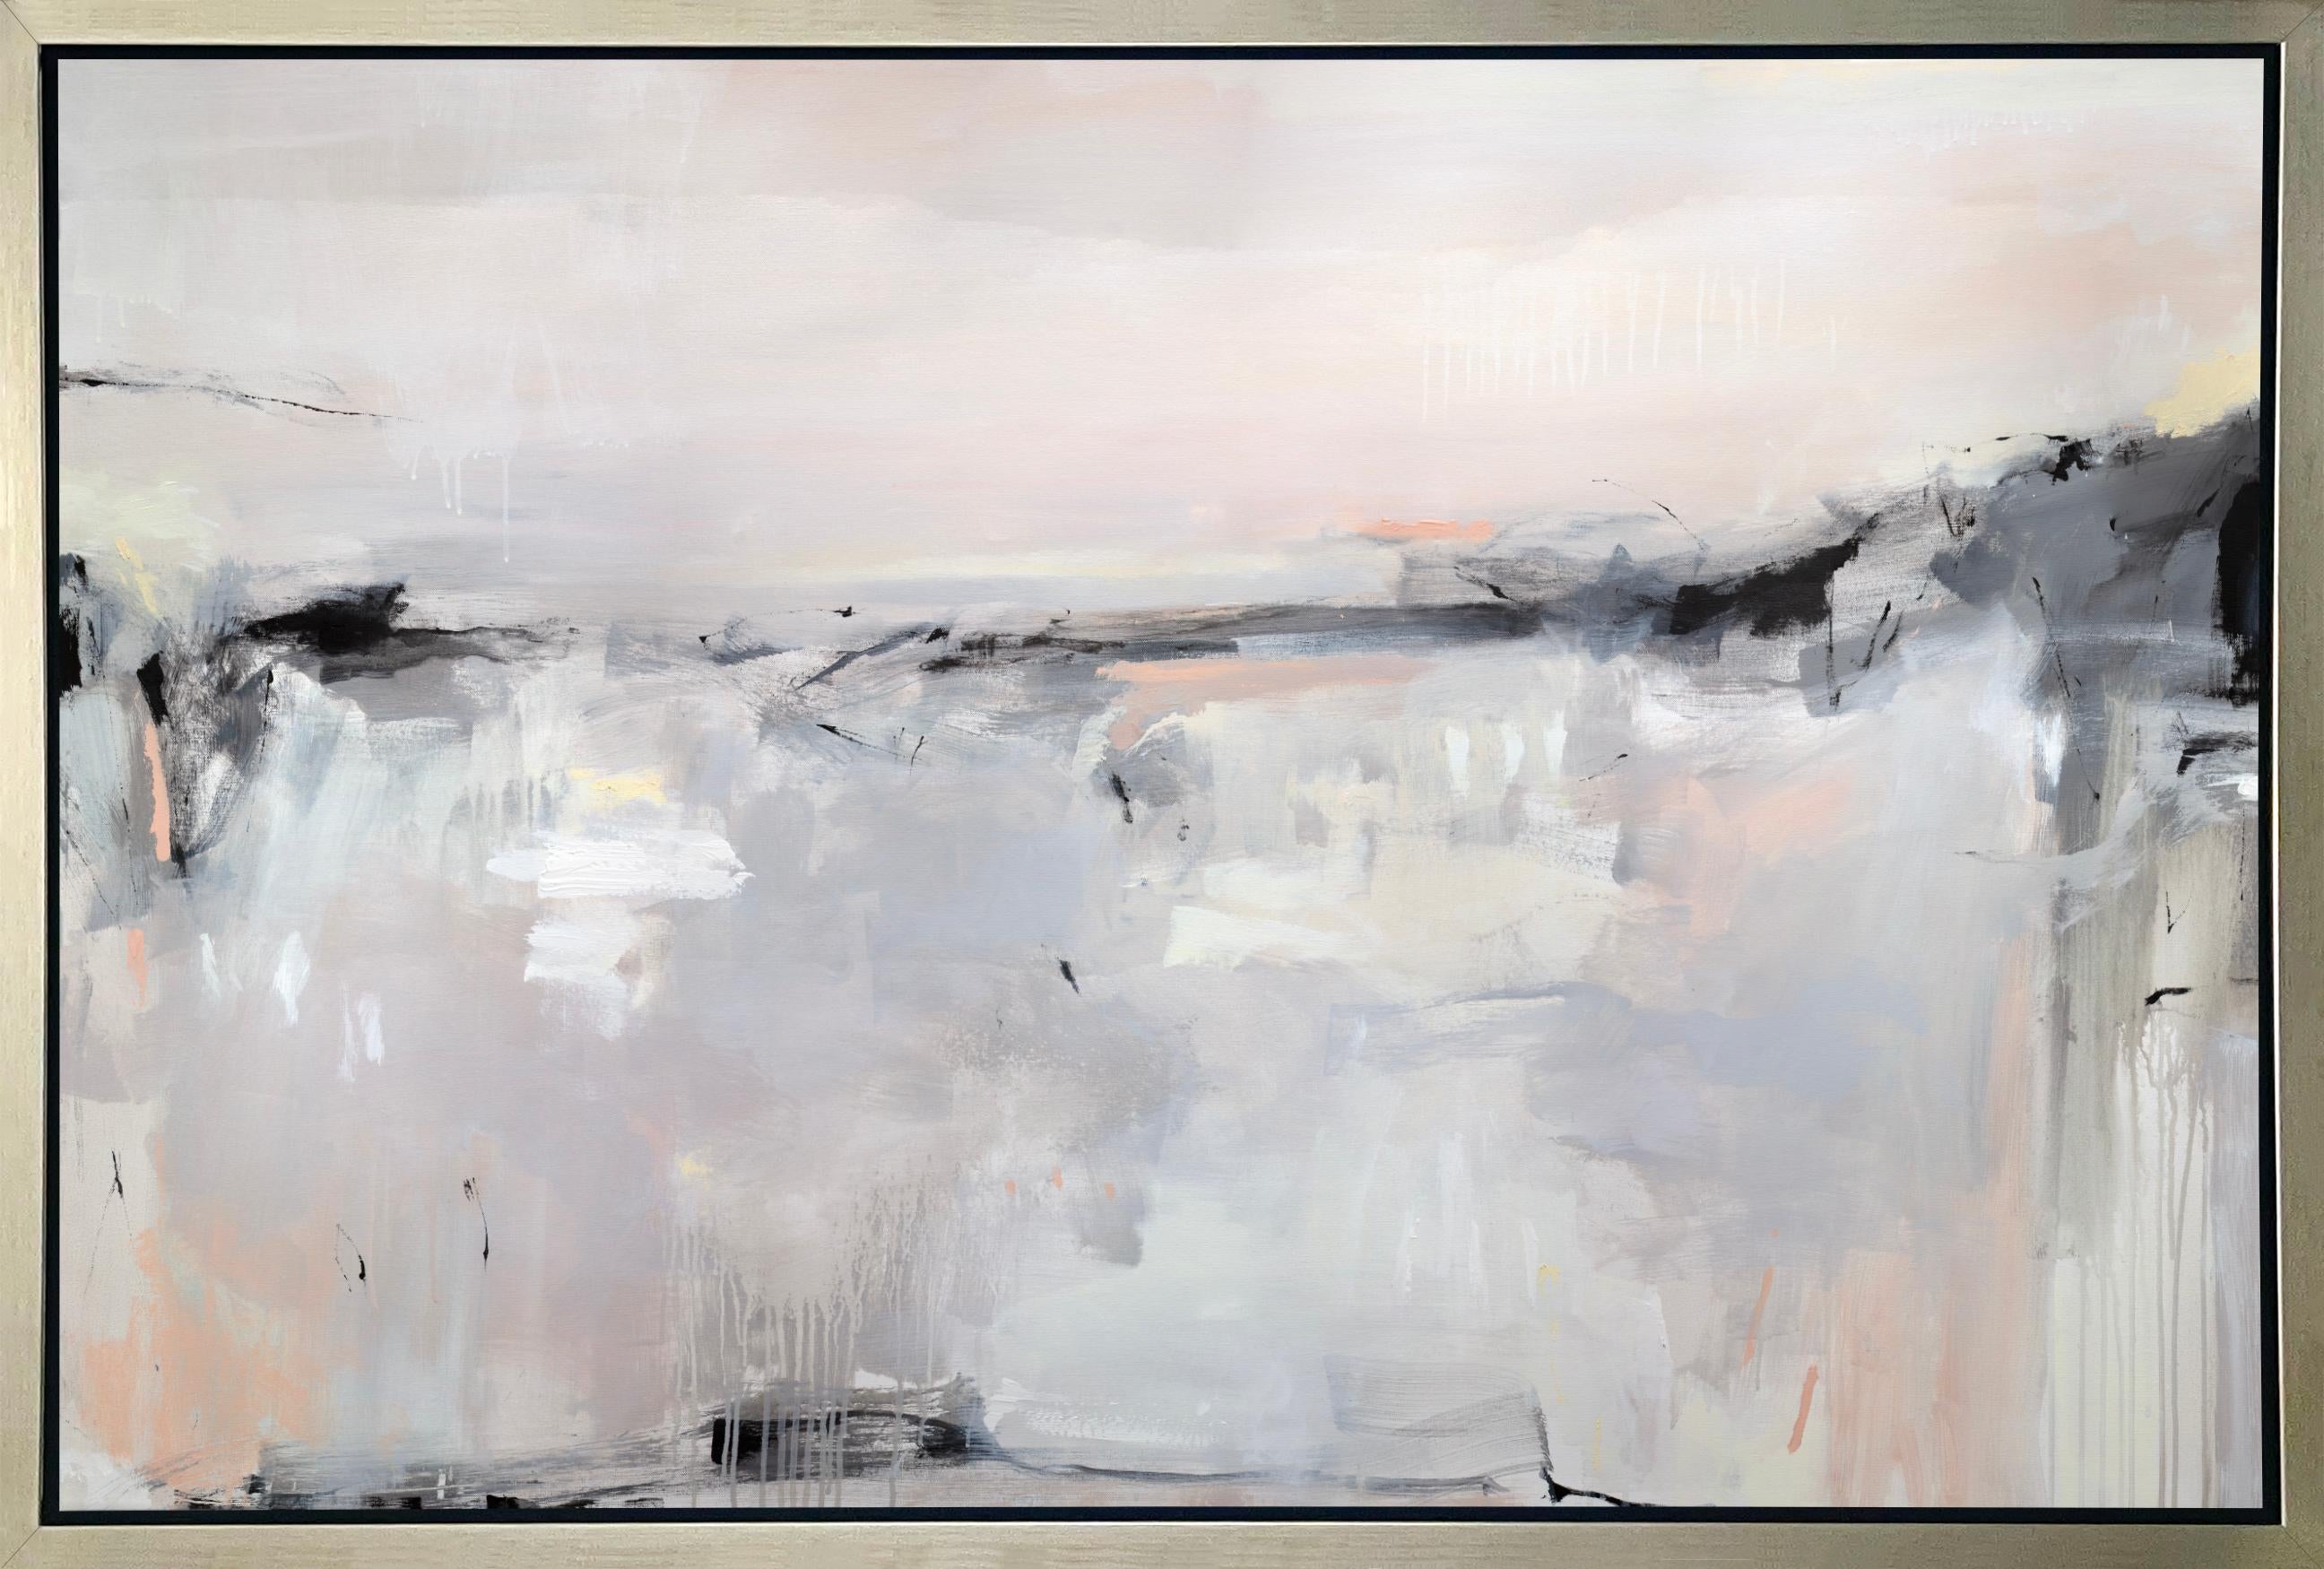 Kelly Rossetti Abstract Print - "Forever Roaming, " Framed Limited Edition Giclee Print, 40" x 60"